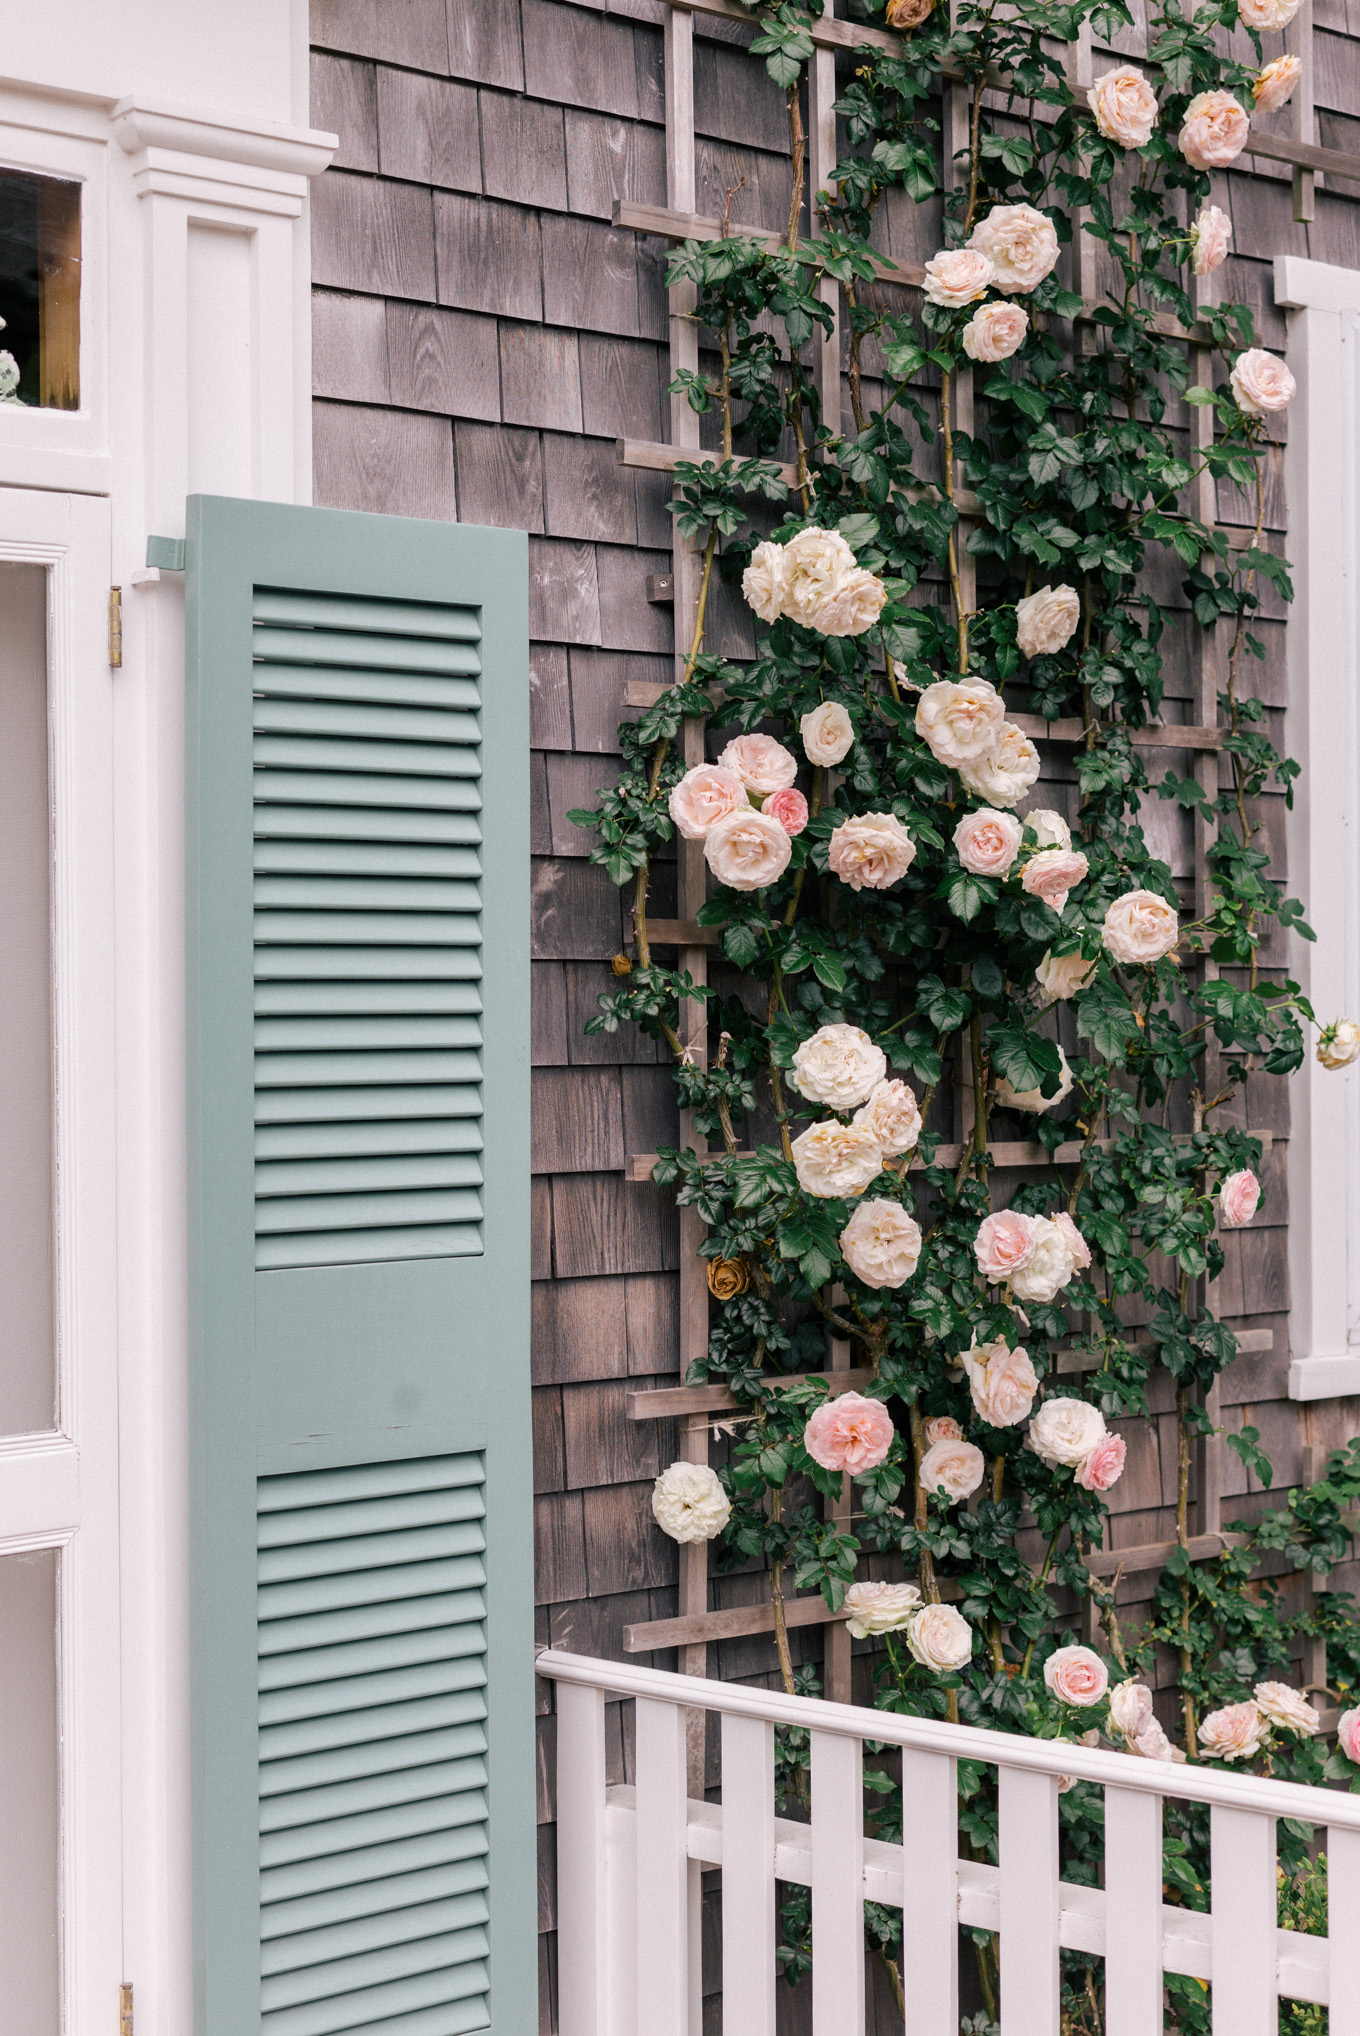 Jess Ann Kirby is drawing inspiration for her garden from David Austen roses growing along side a home.